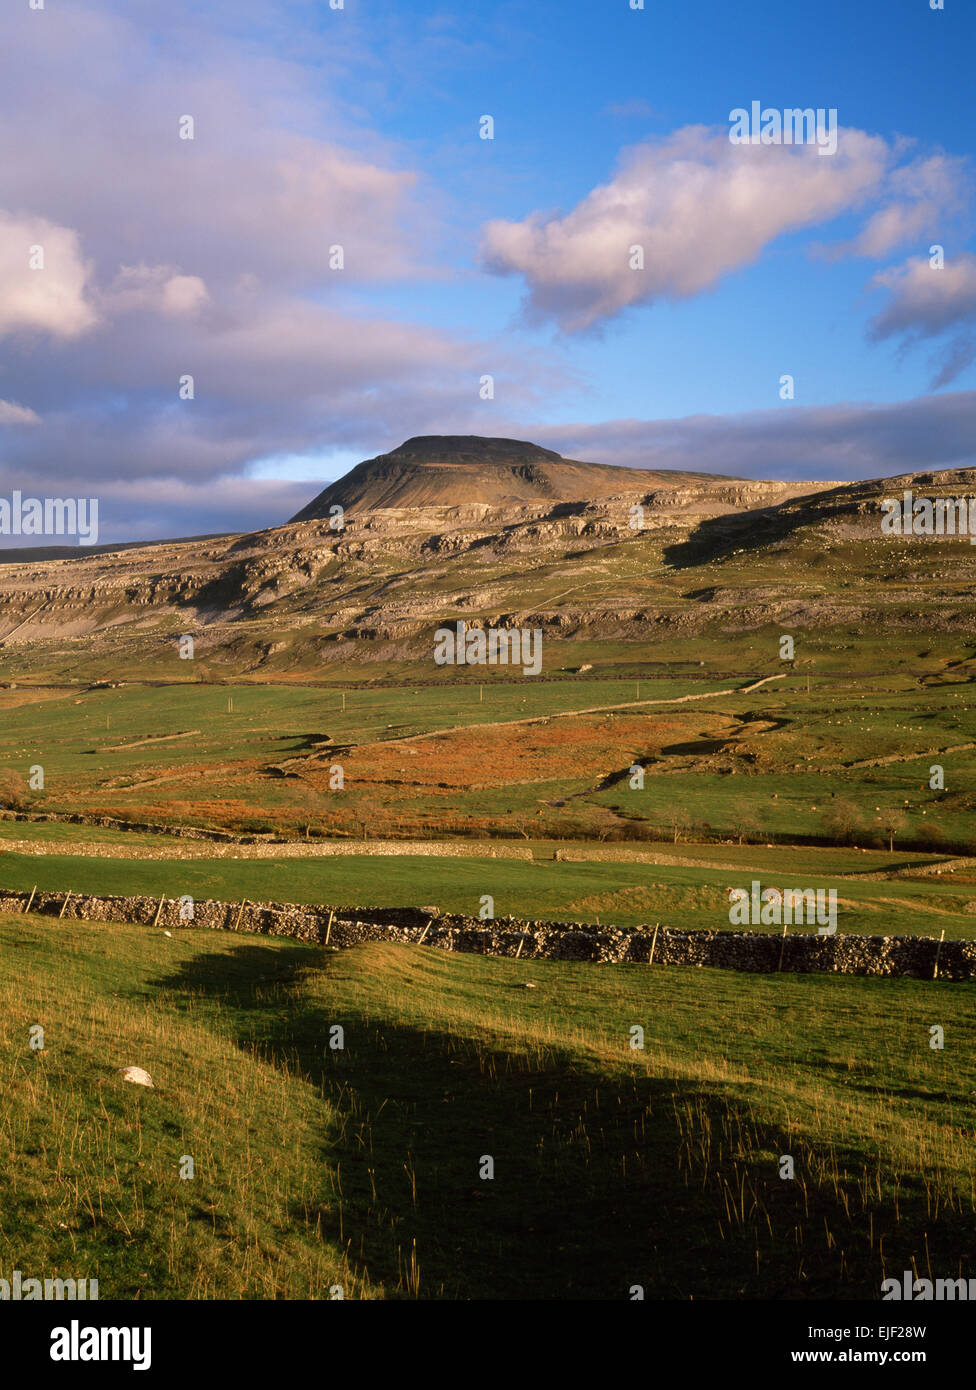 Looking ESE across the Doe valley to Ingleborough Hill, North Yorkshire, England's highest hillfort, stronghold of the Iron Age Brigantes tribes. Stock Photo